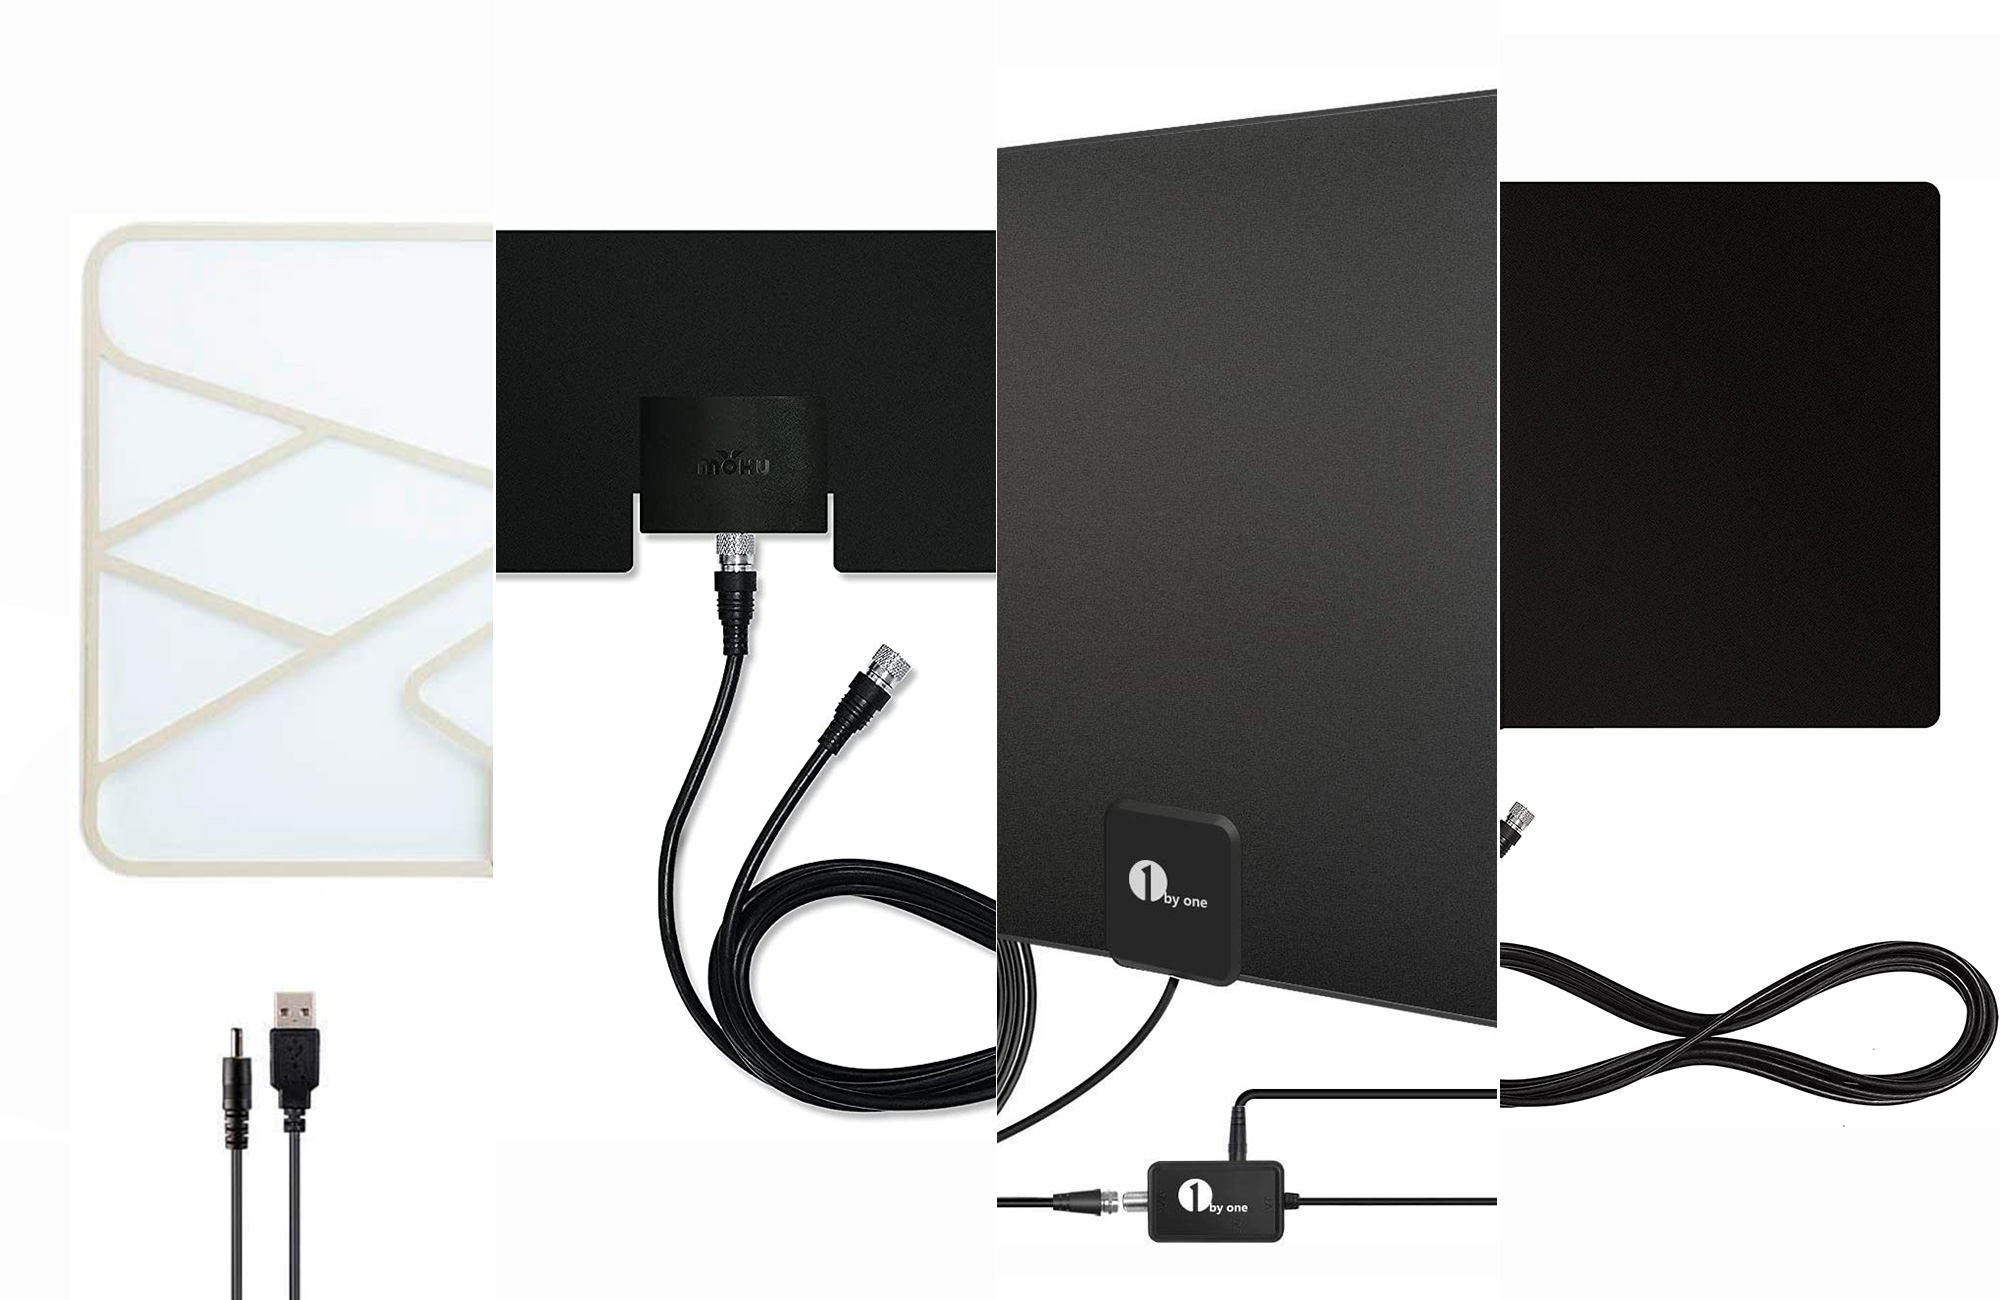 TV BOOST ANTENNA REVIEWS (UPDATED): WHY BUY TV BOOSTER ANTENNA?